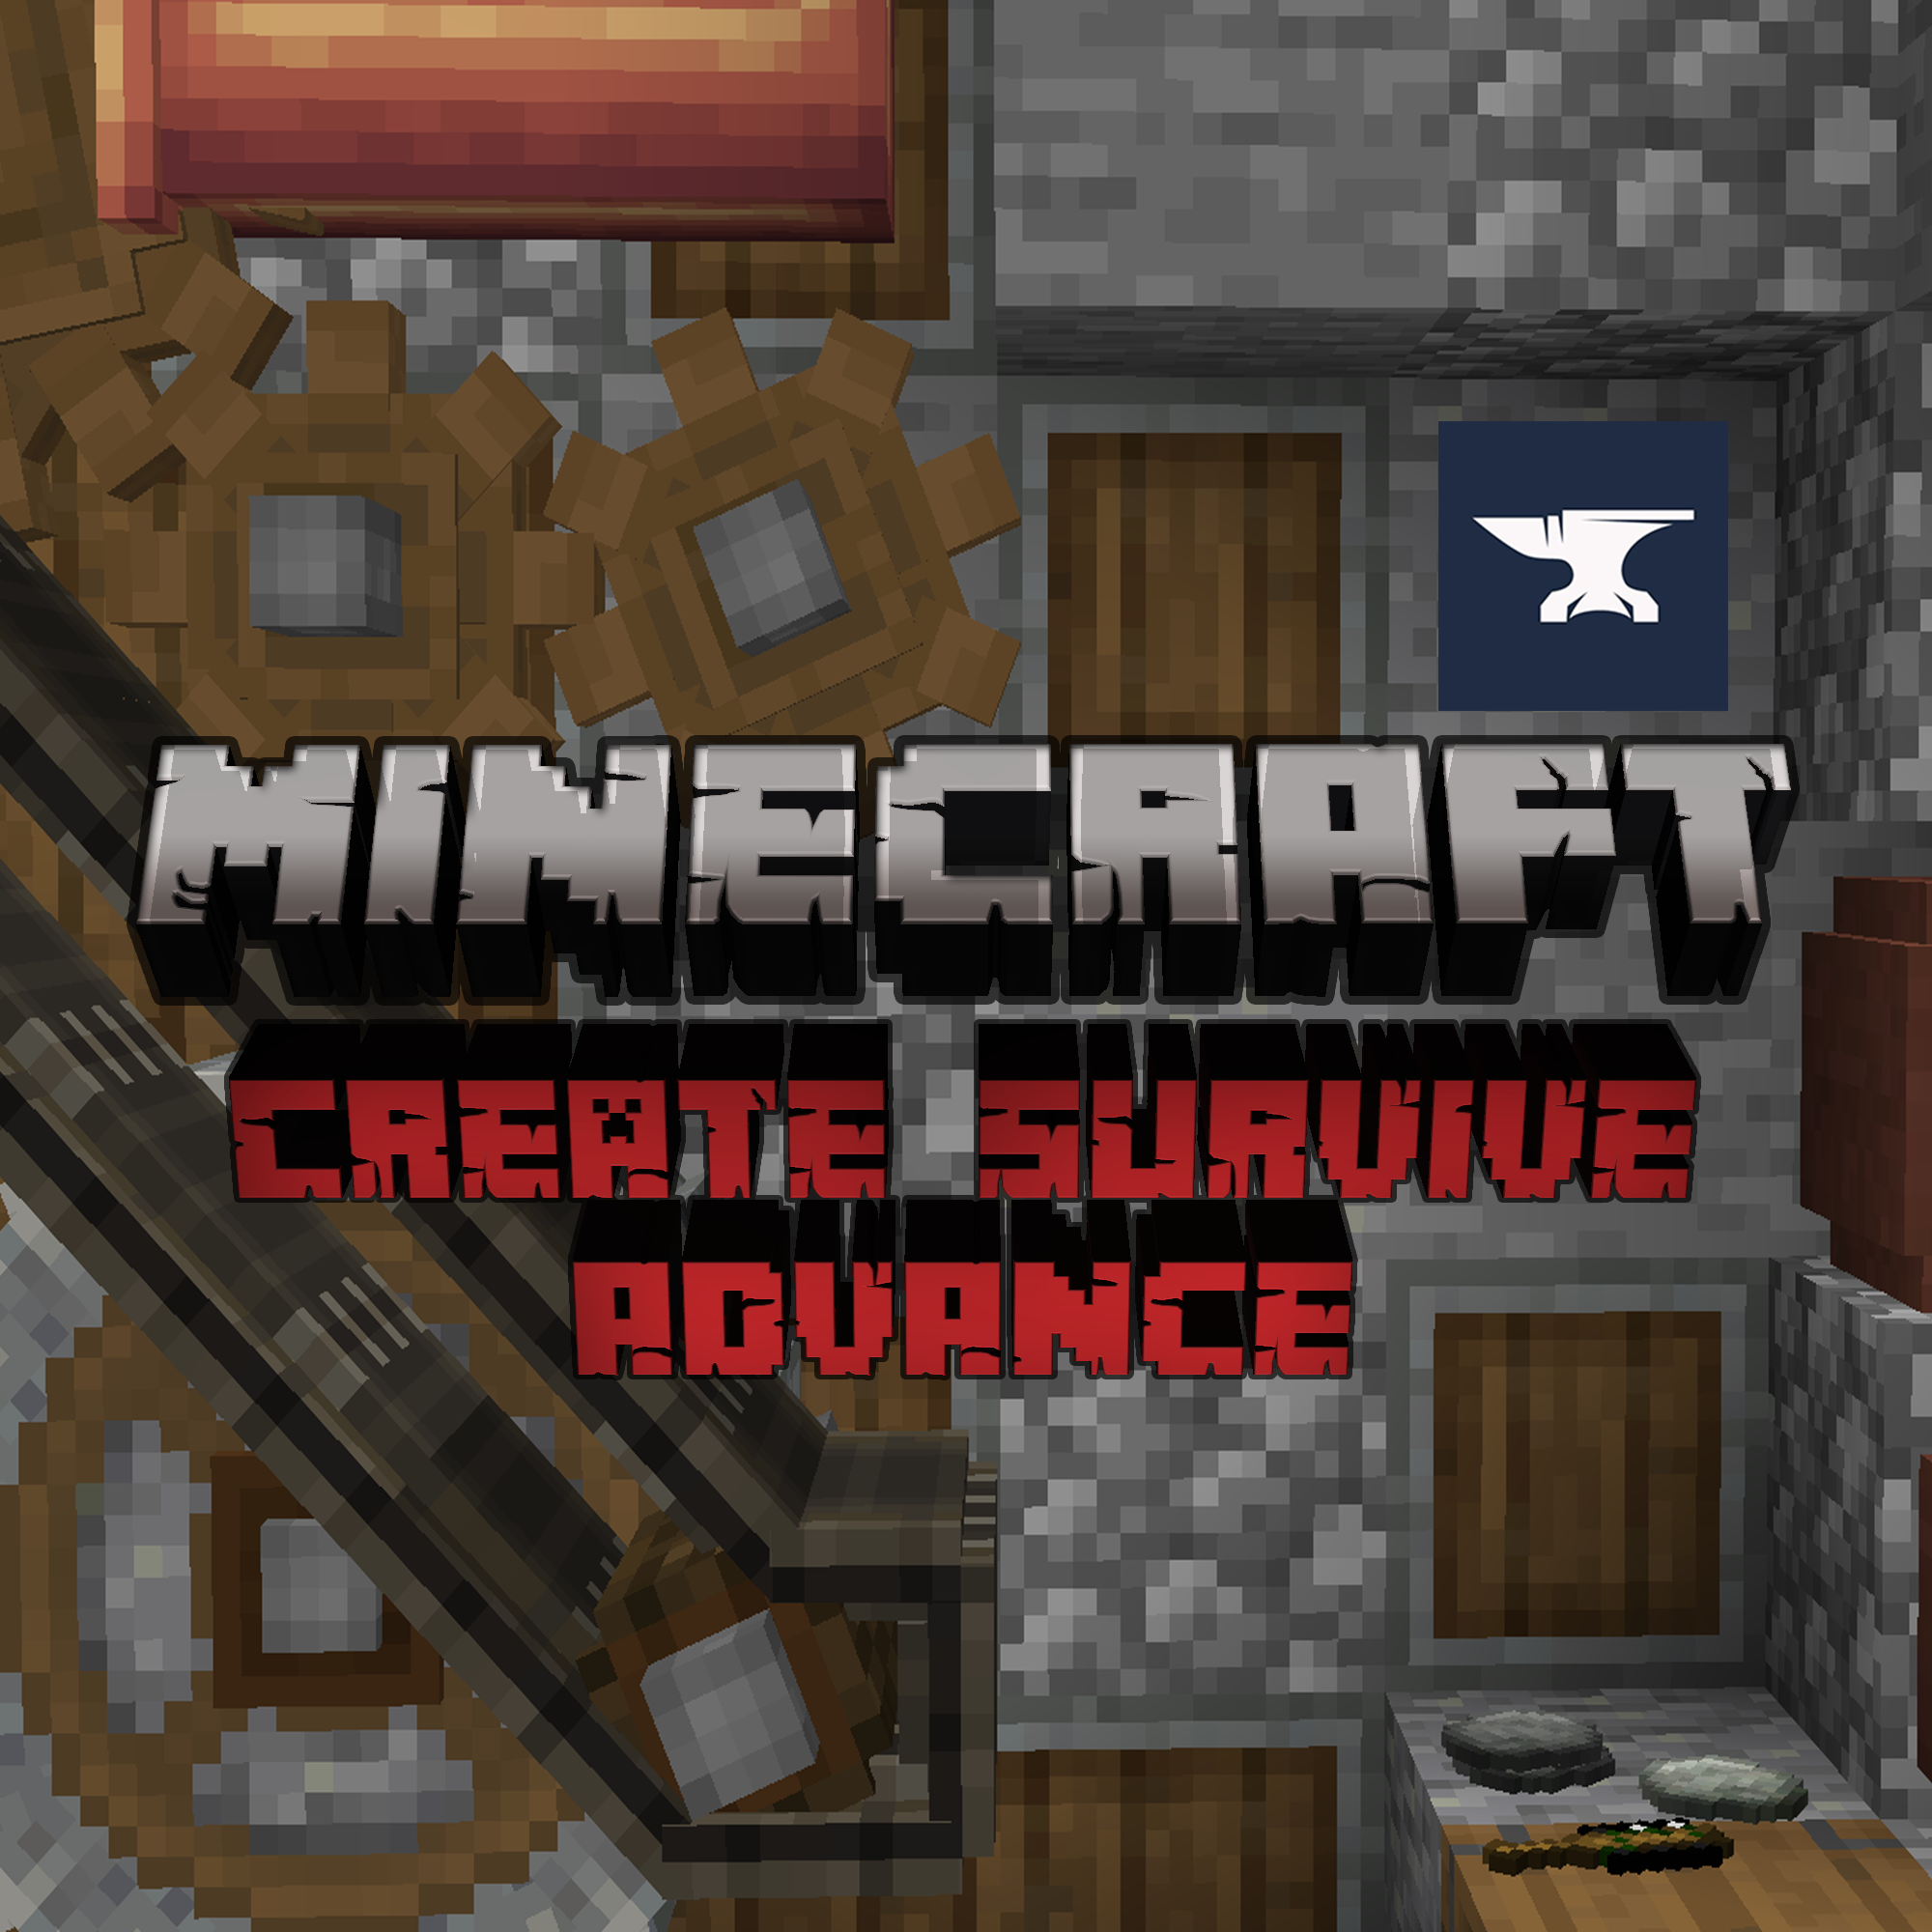 Advanced Creation: a mod for easy building - Minecraft Mods - CurseForge